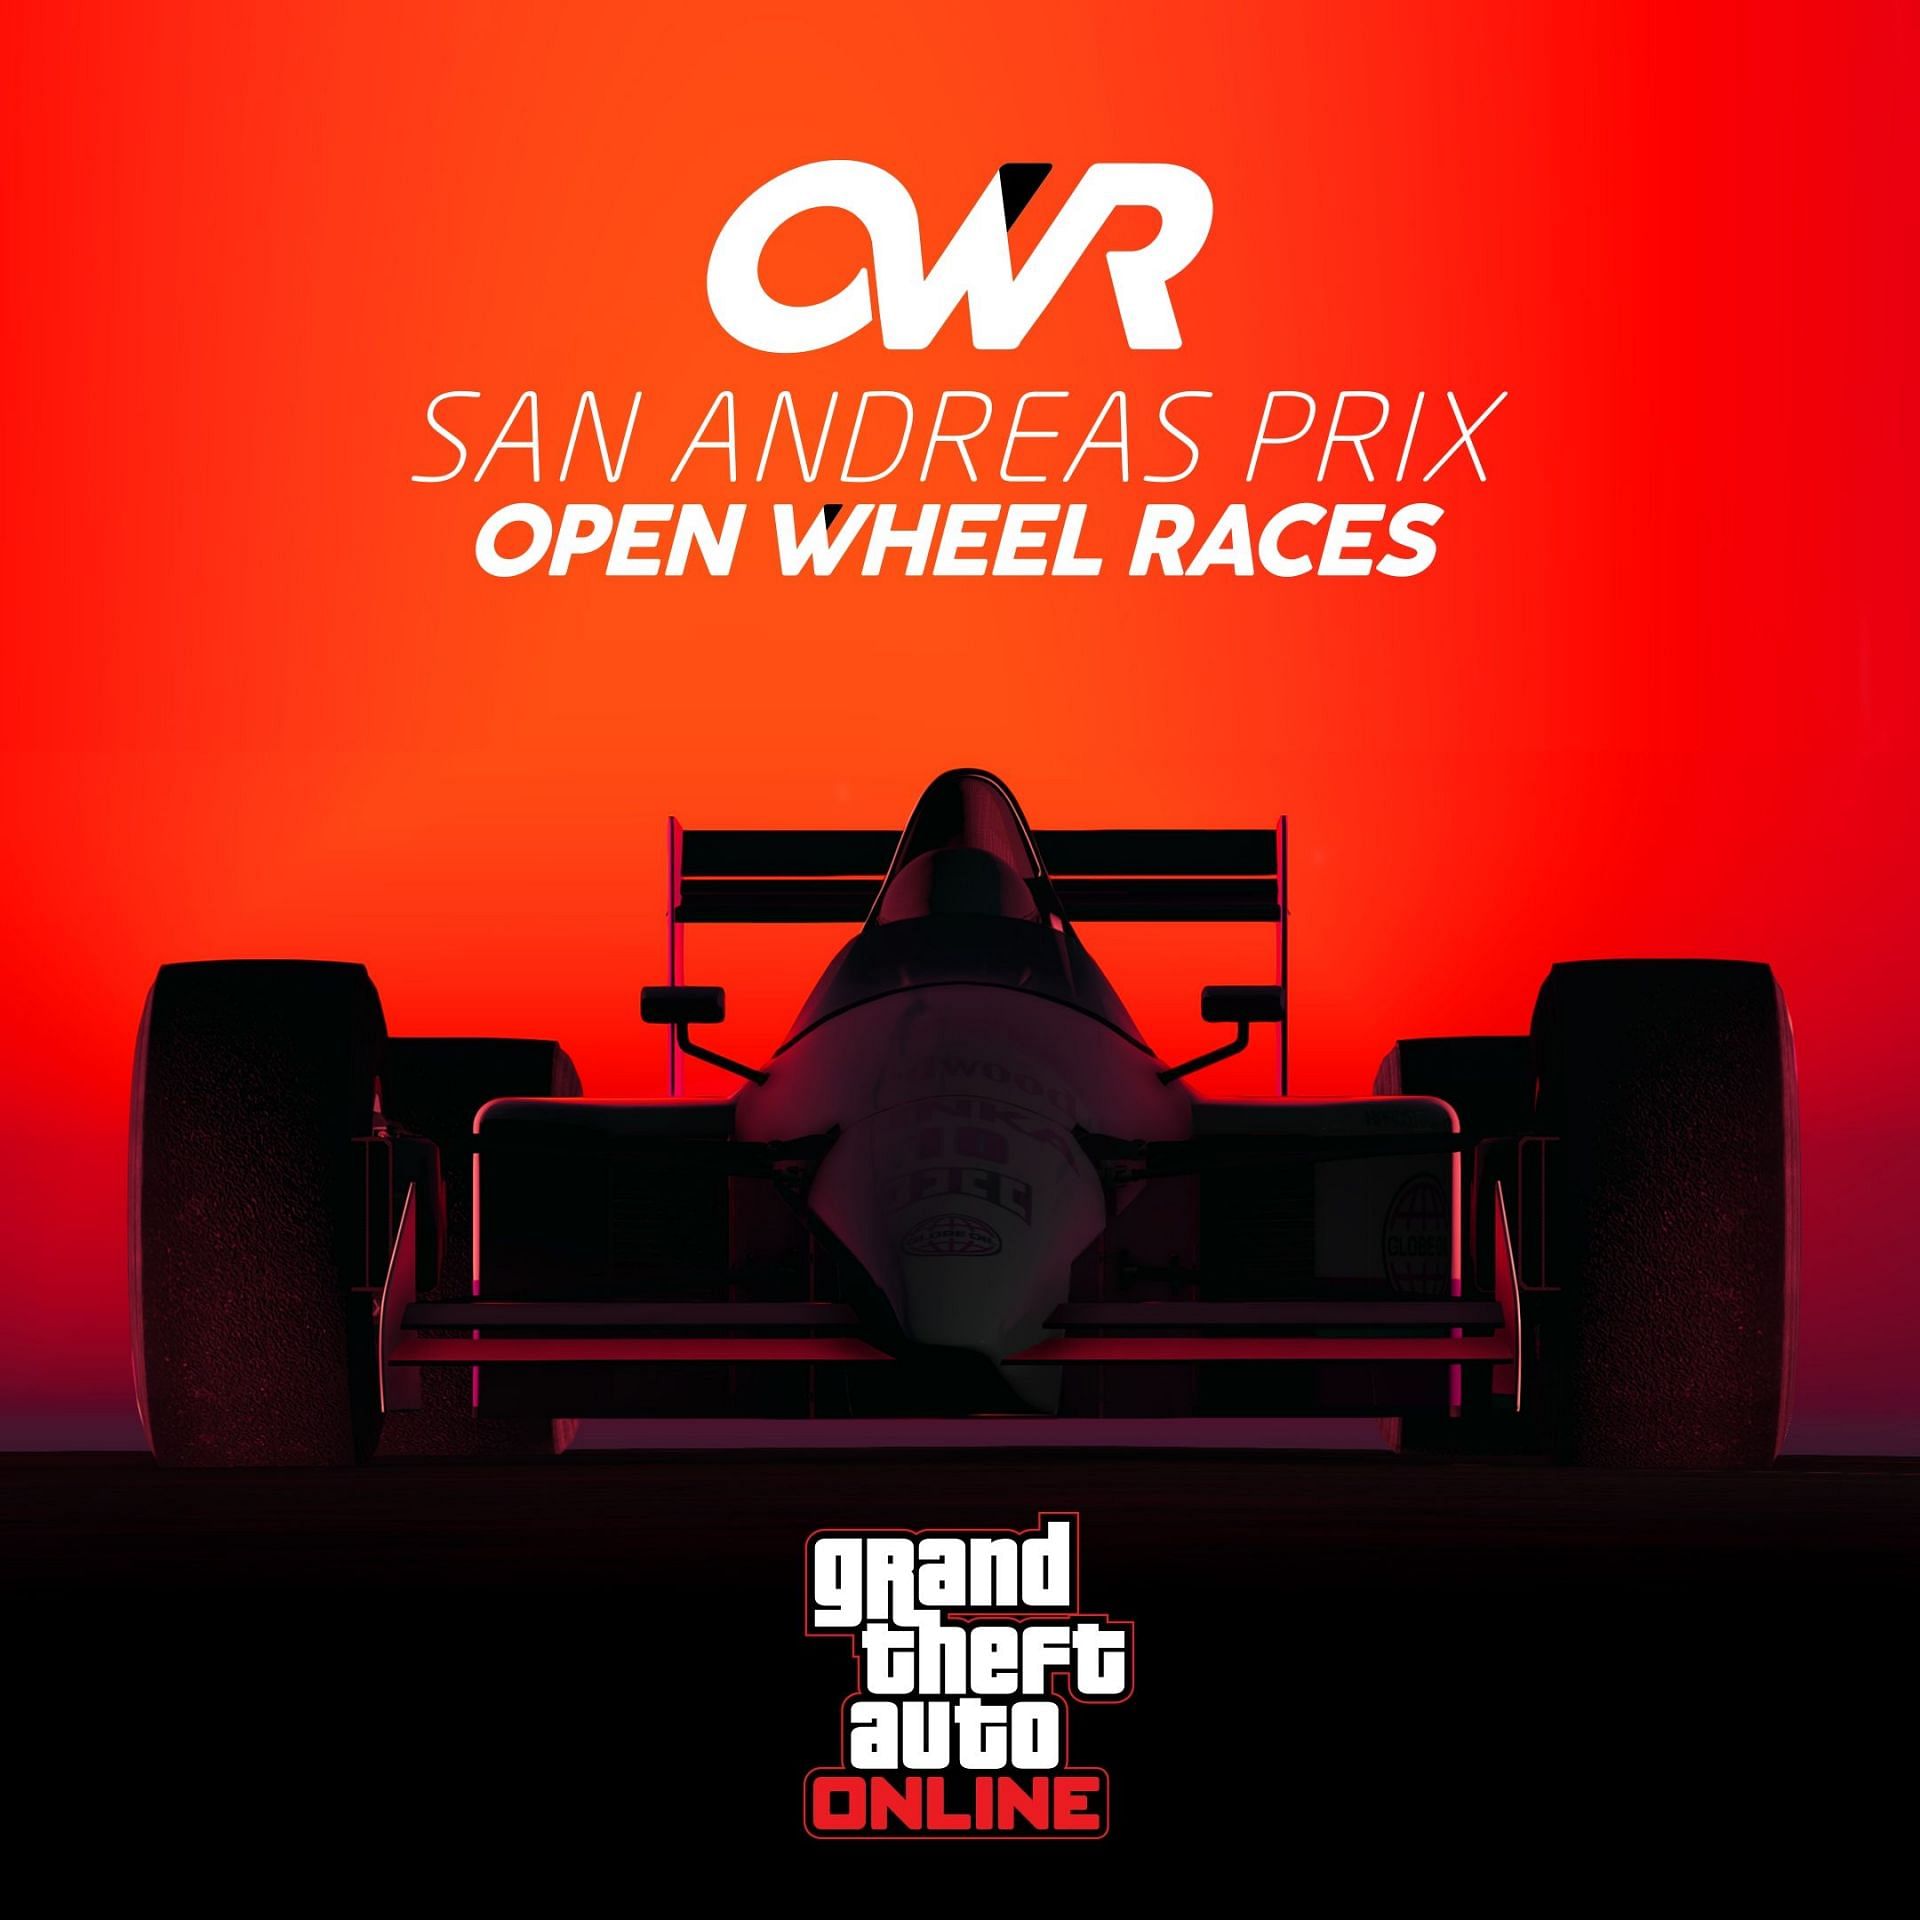 San Andreas Prix Open Wheel Races were added to GTA Online in February 2020 [Image via Rockstar Games]